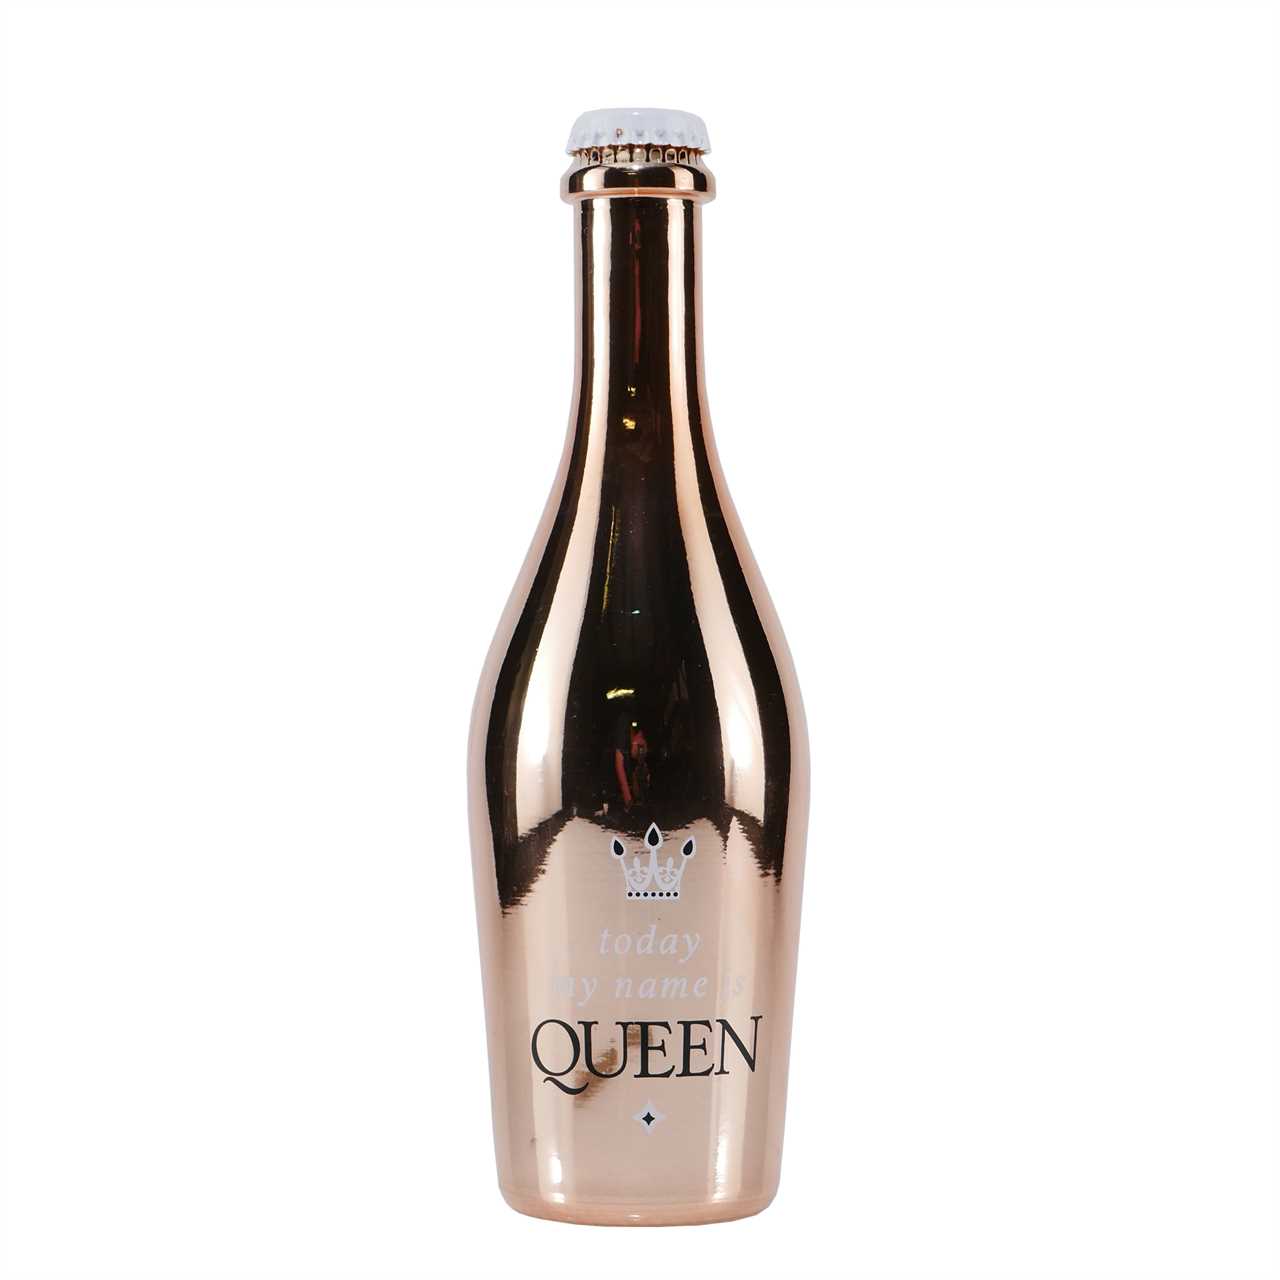 today my name is Queen - Perlwein (6 x 0,375L)